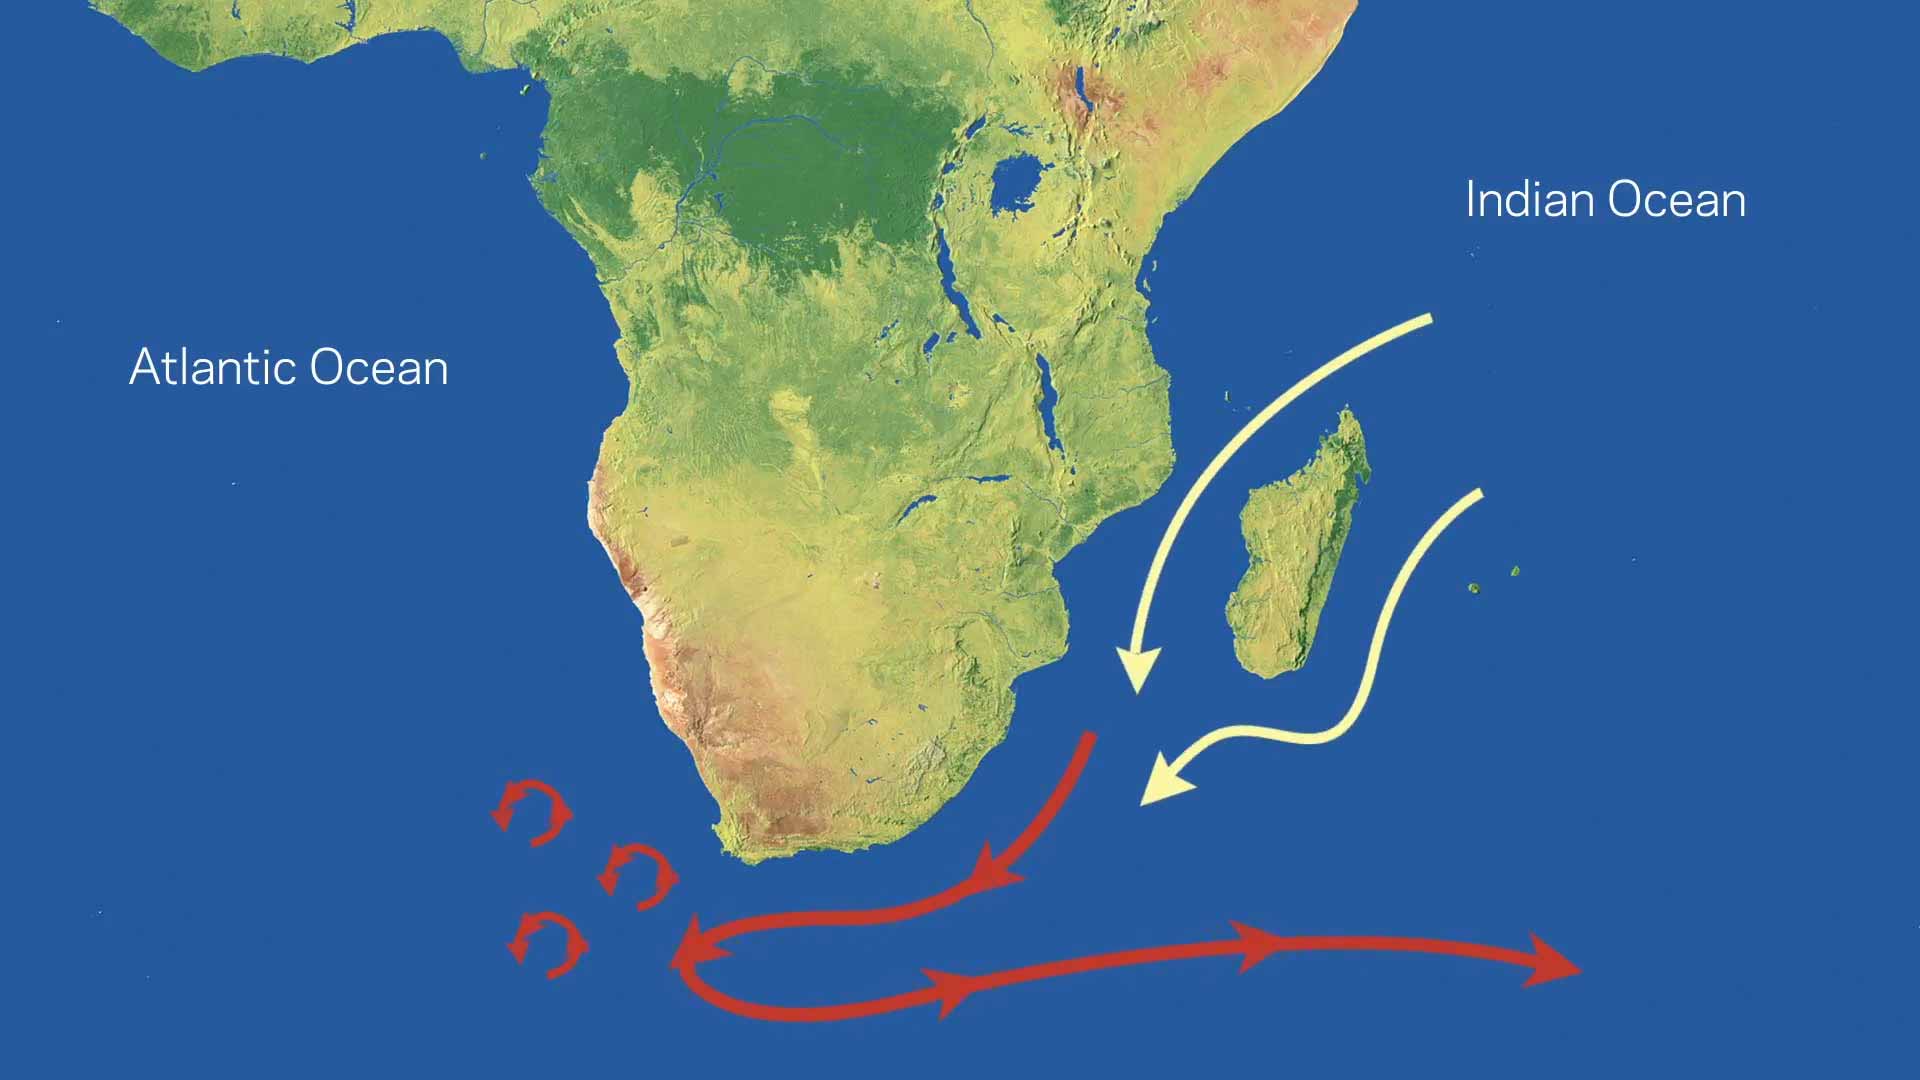 Animated arrows showing the Agulhas currents.